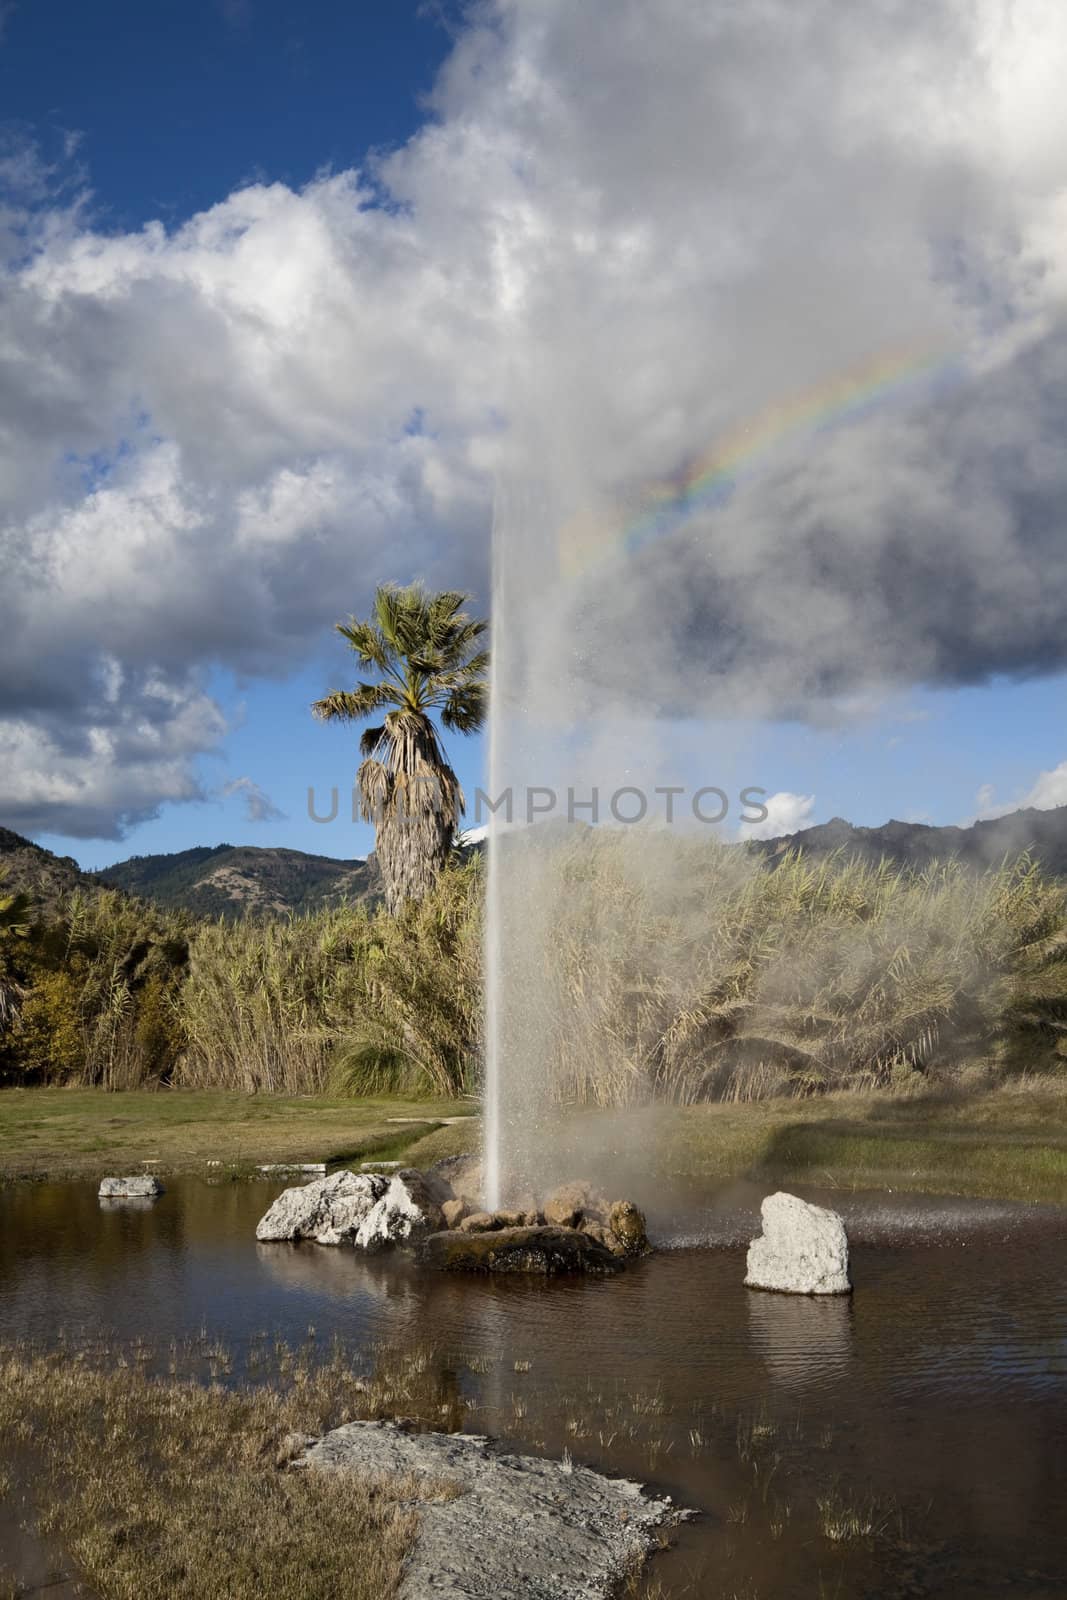 A natural geyser shooting water out of the ground and into the air